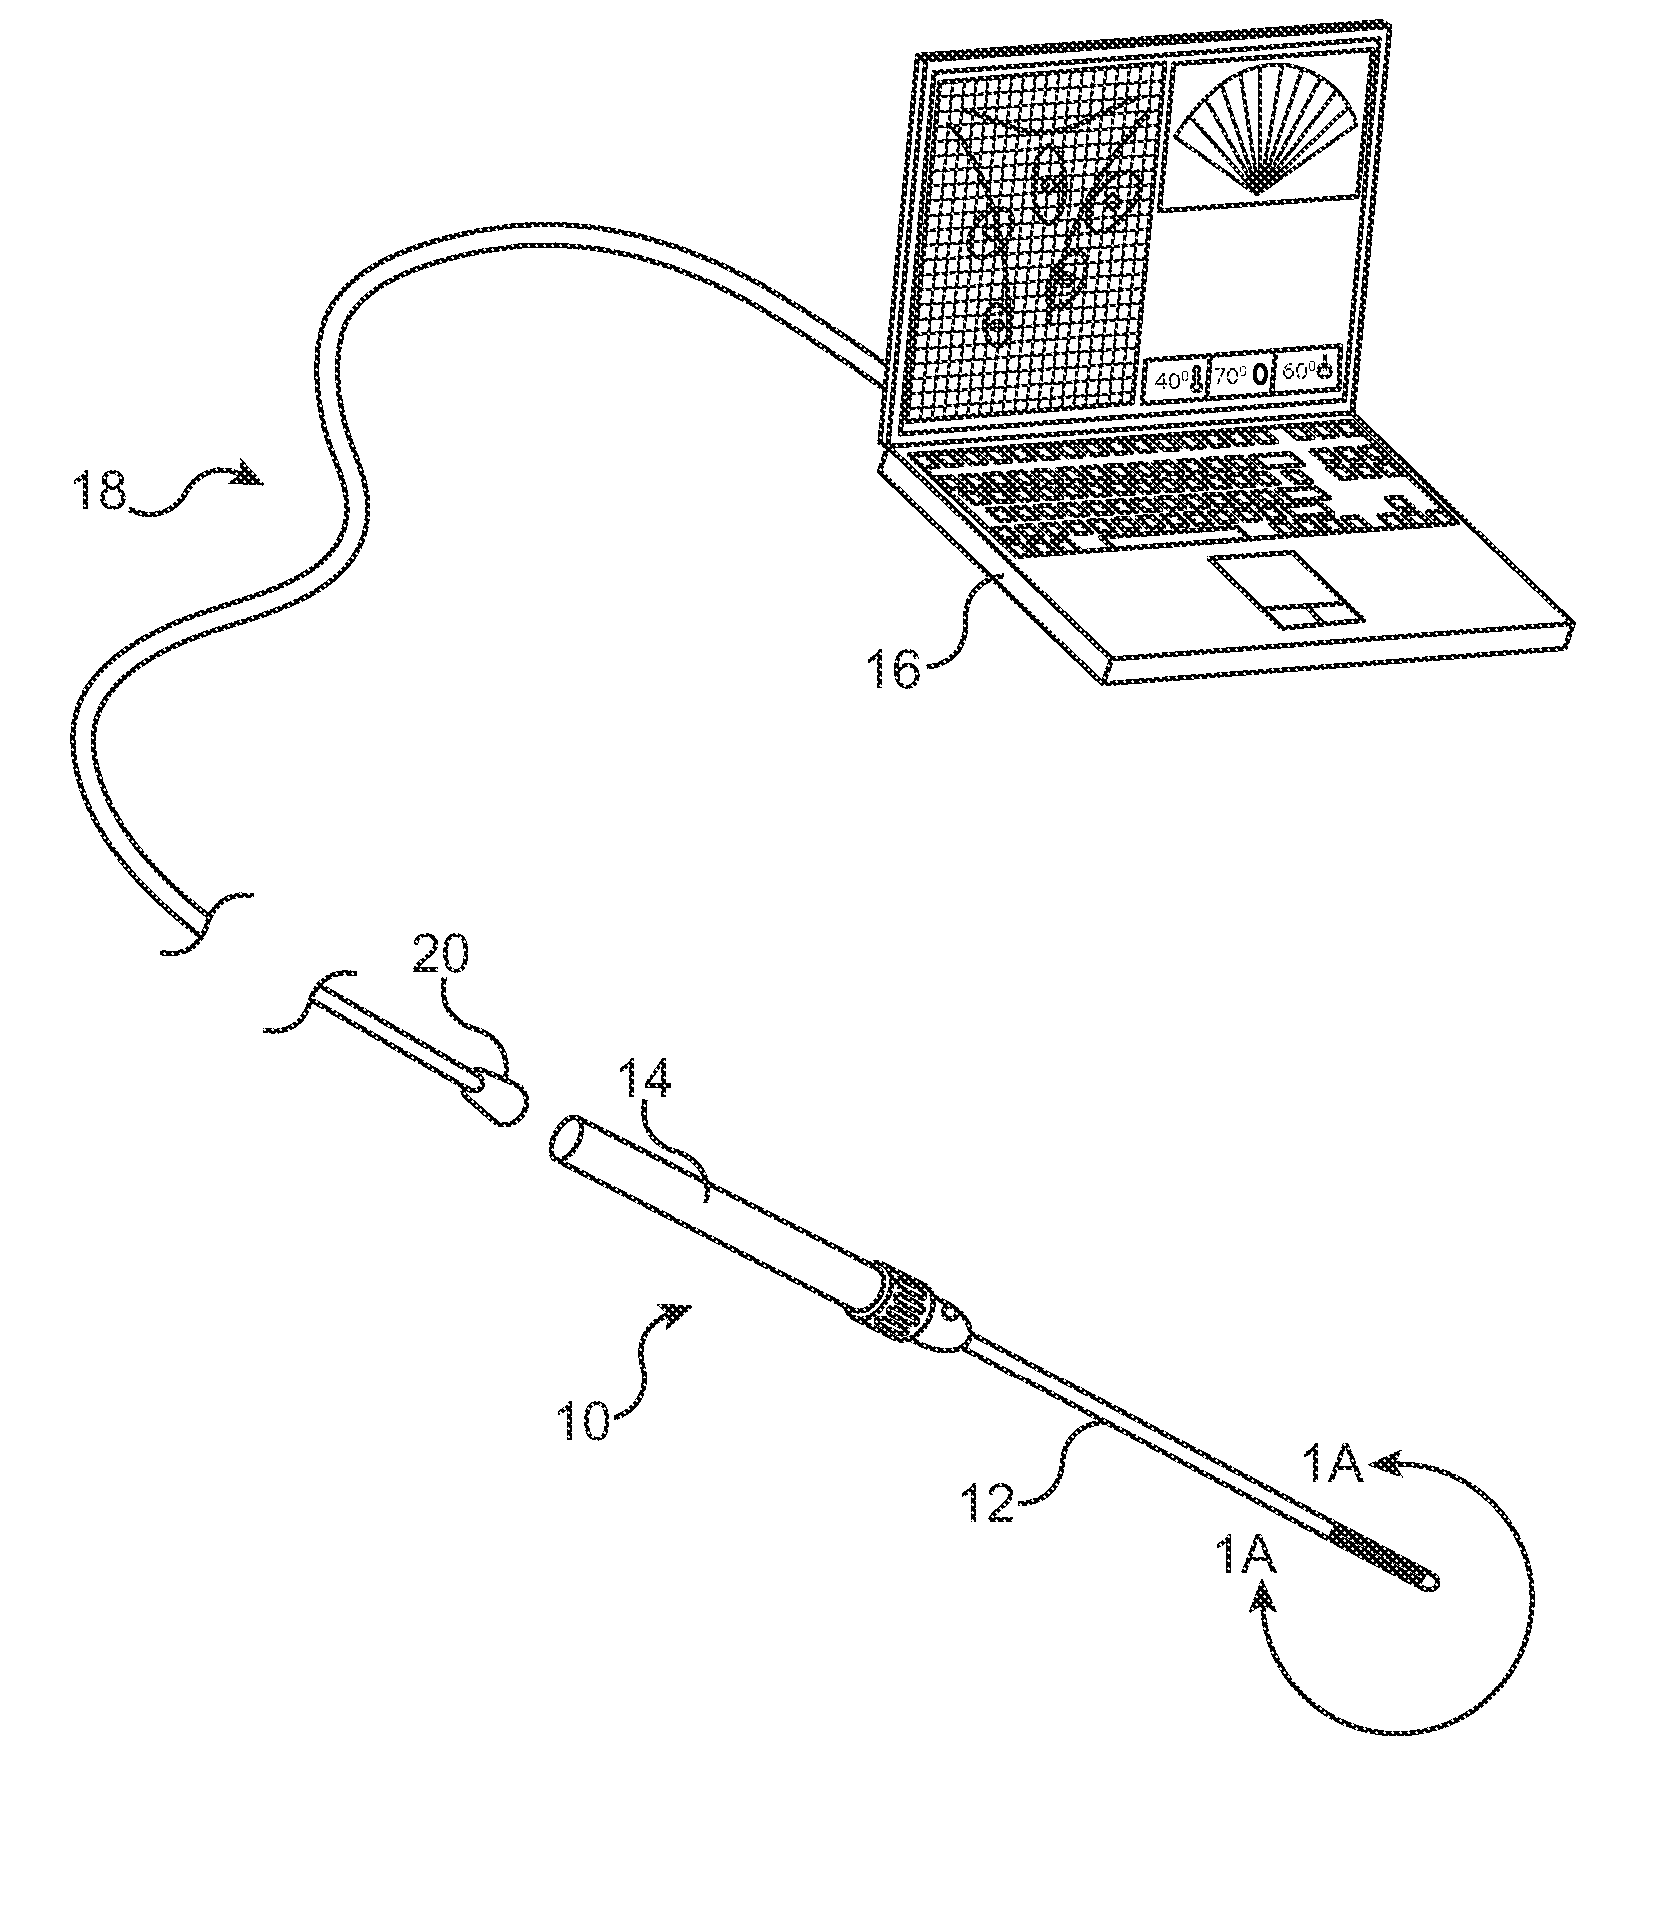 Intrauterine ultrasound and method for use